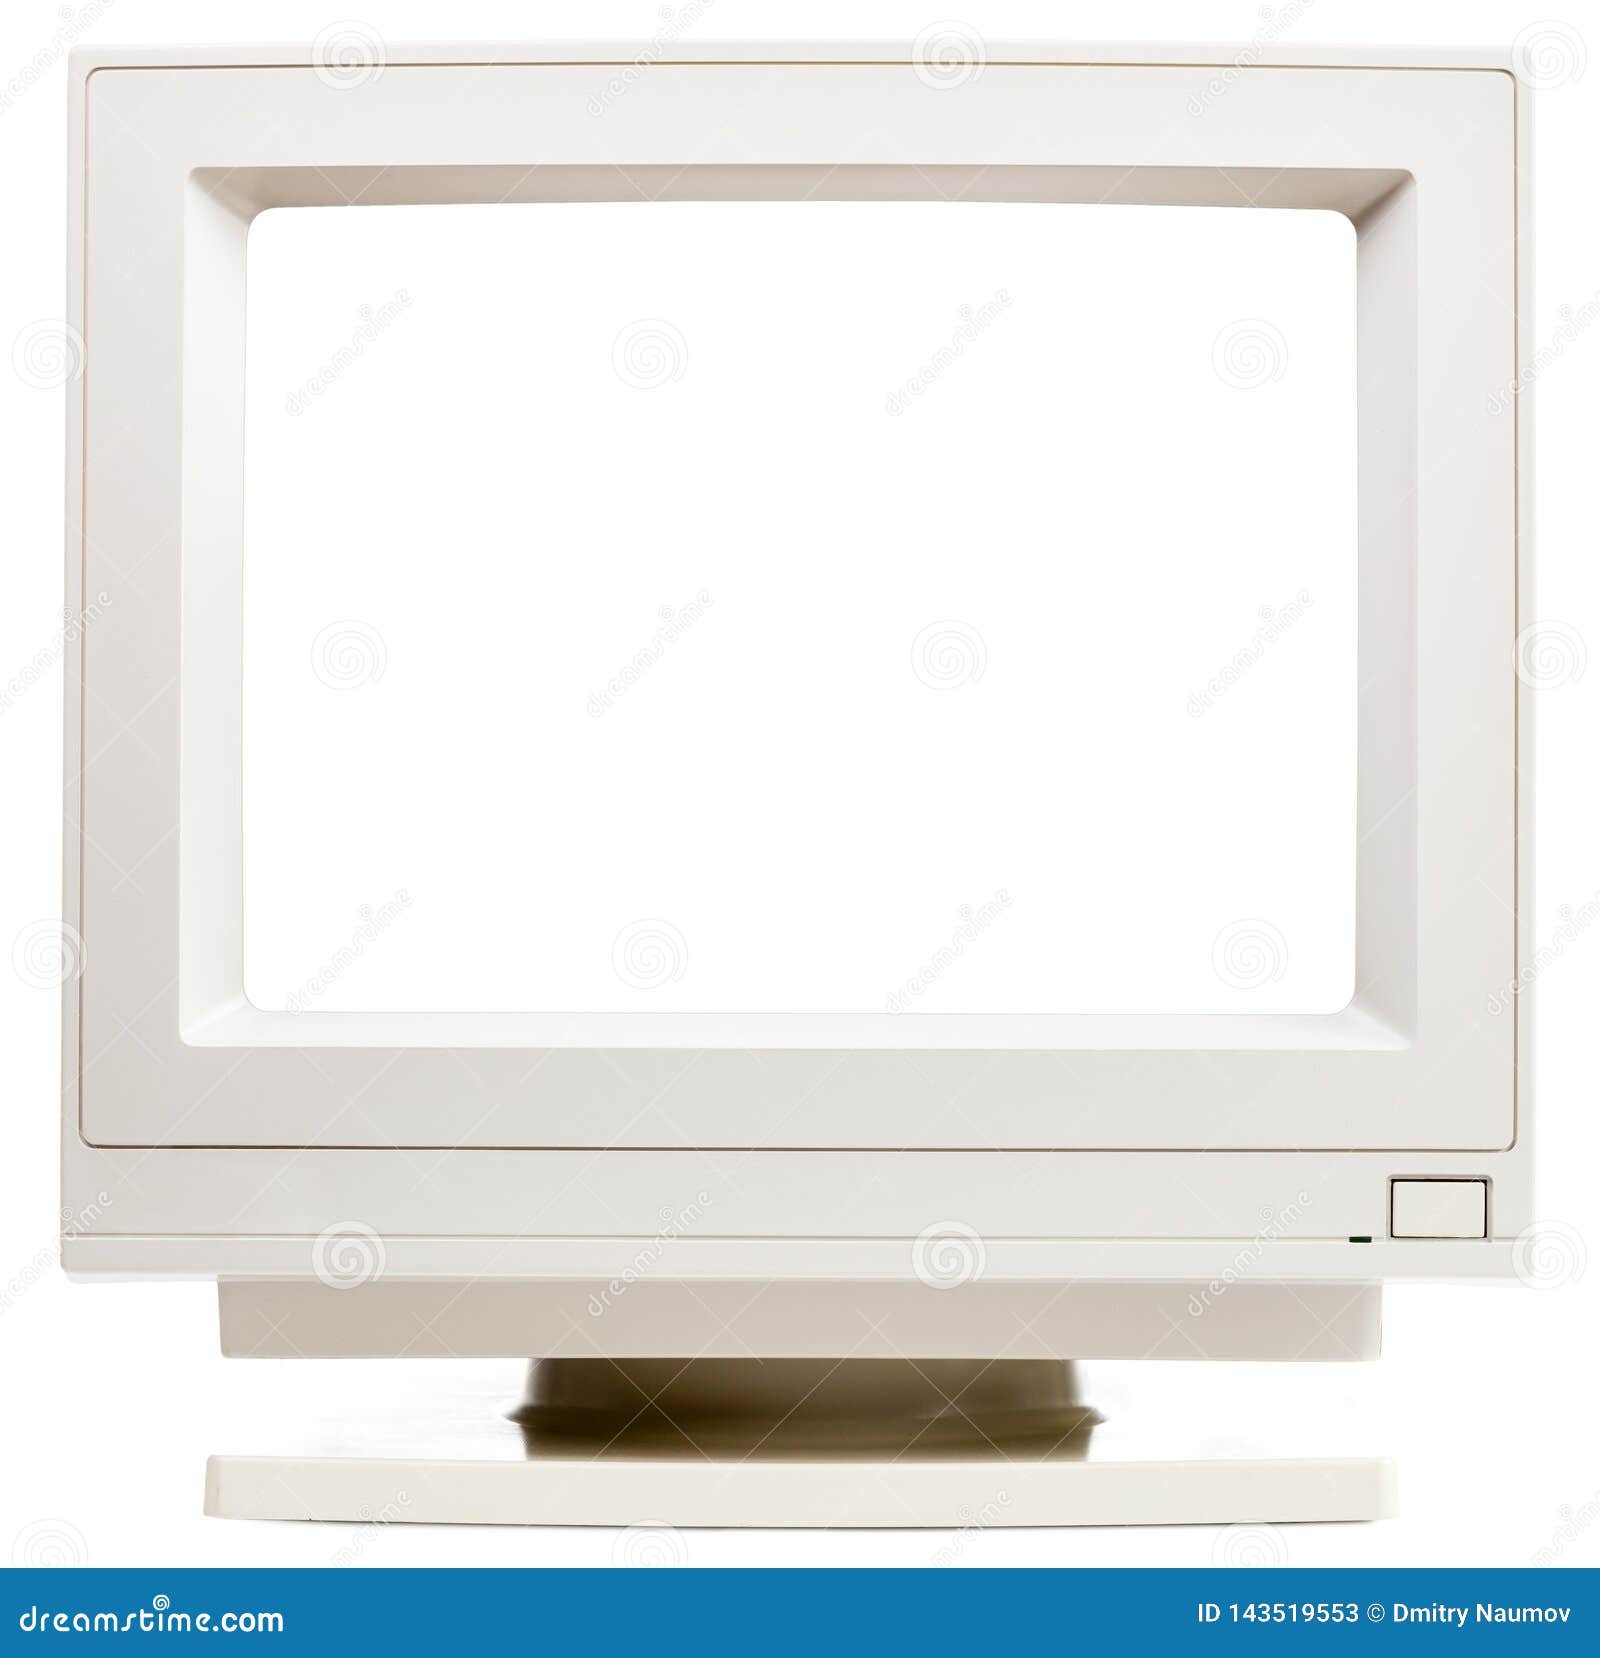 697 Crt Computer Photos - Free & Royalty-Free Stock Photos from Dreamstime